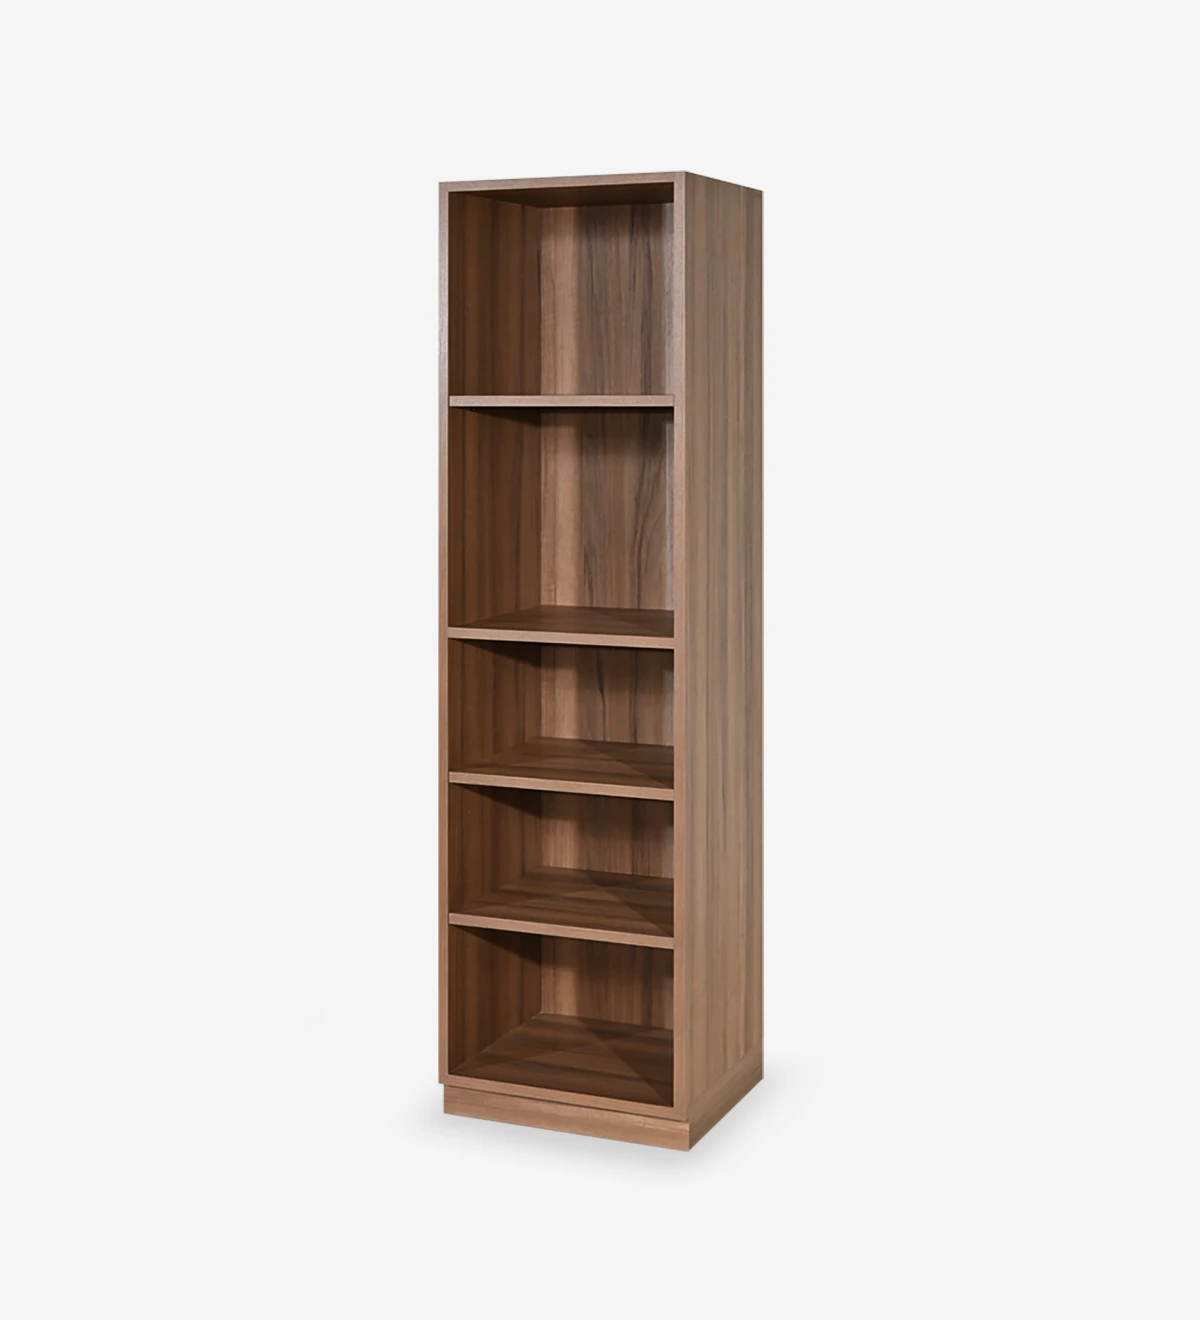 Low bookcase in walnut, with removable shelves.